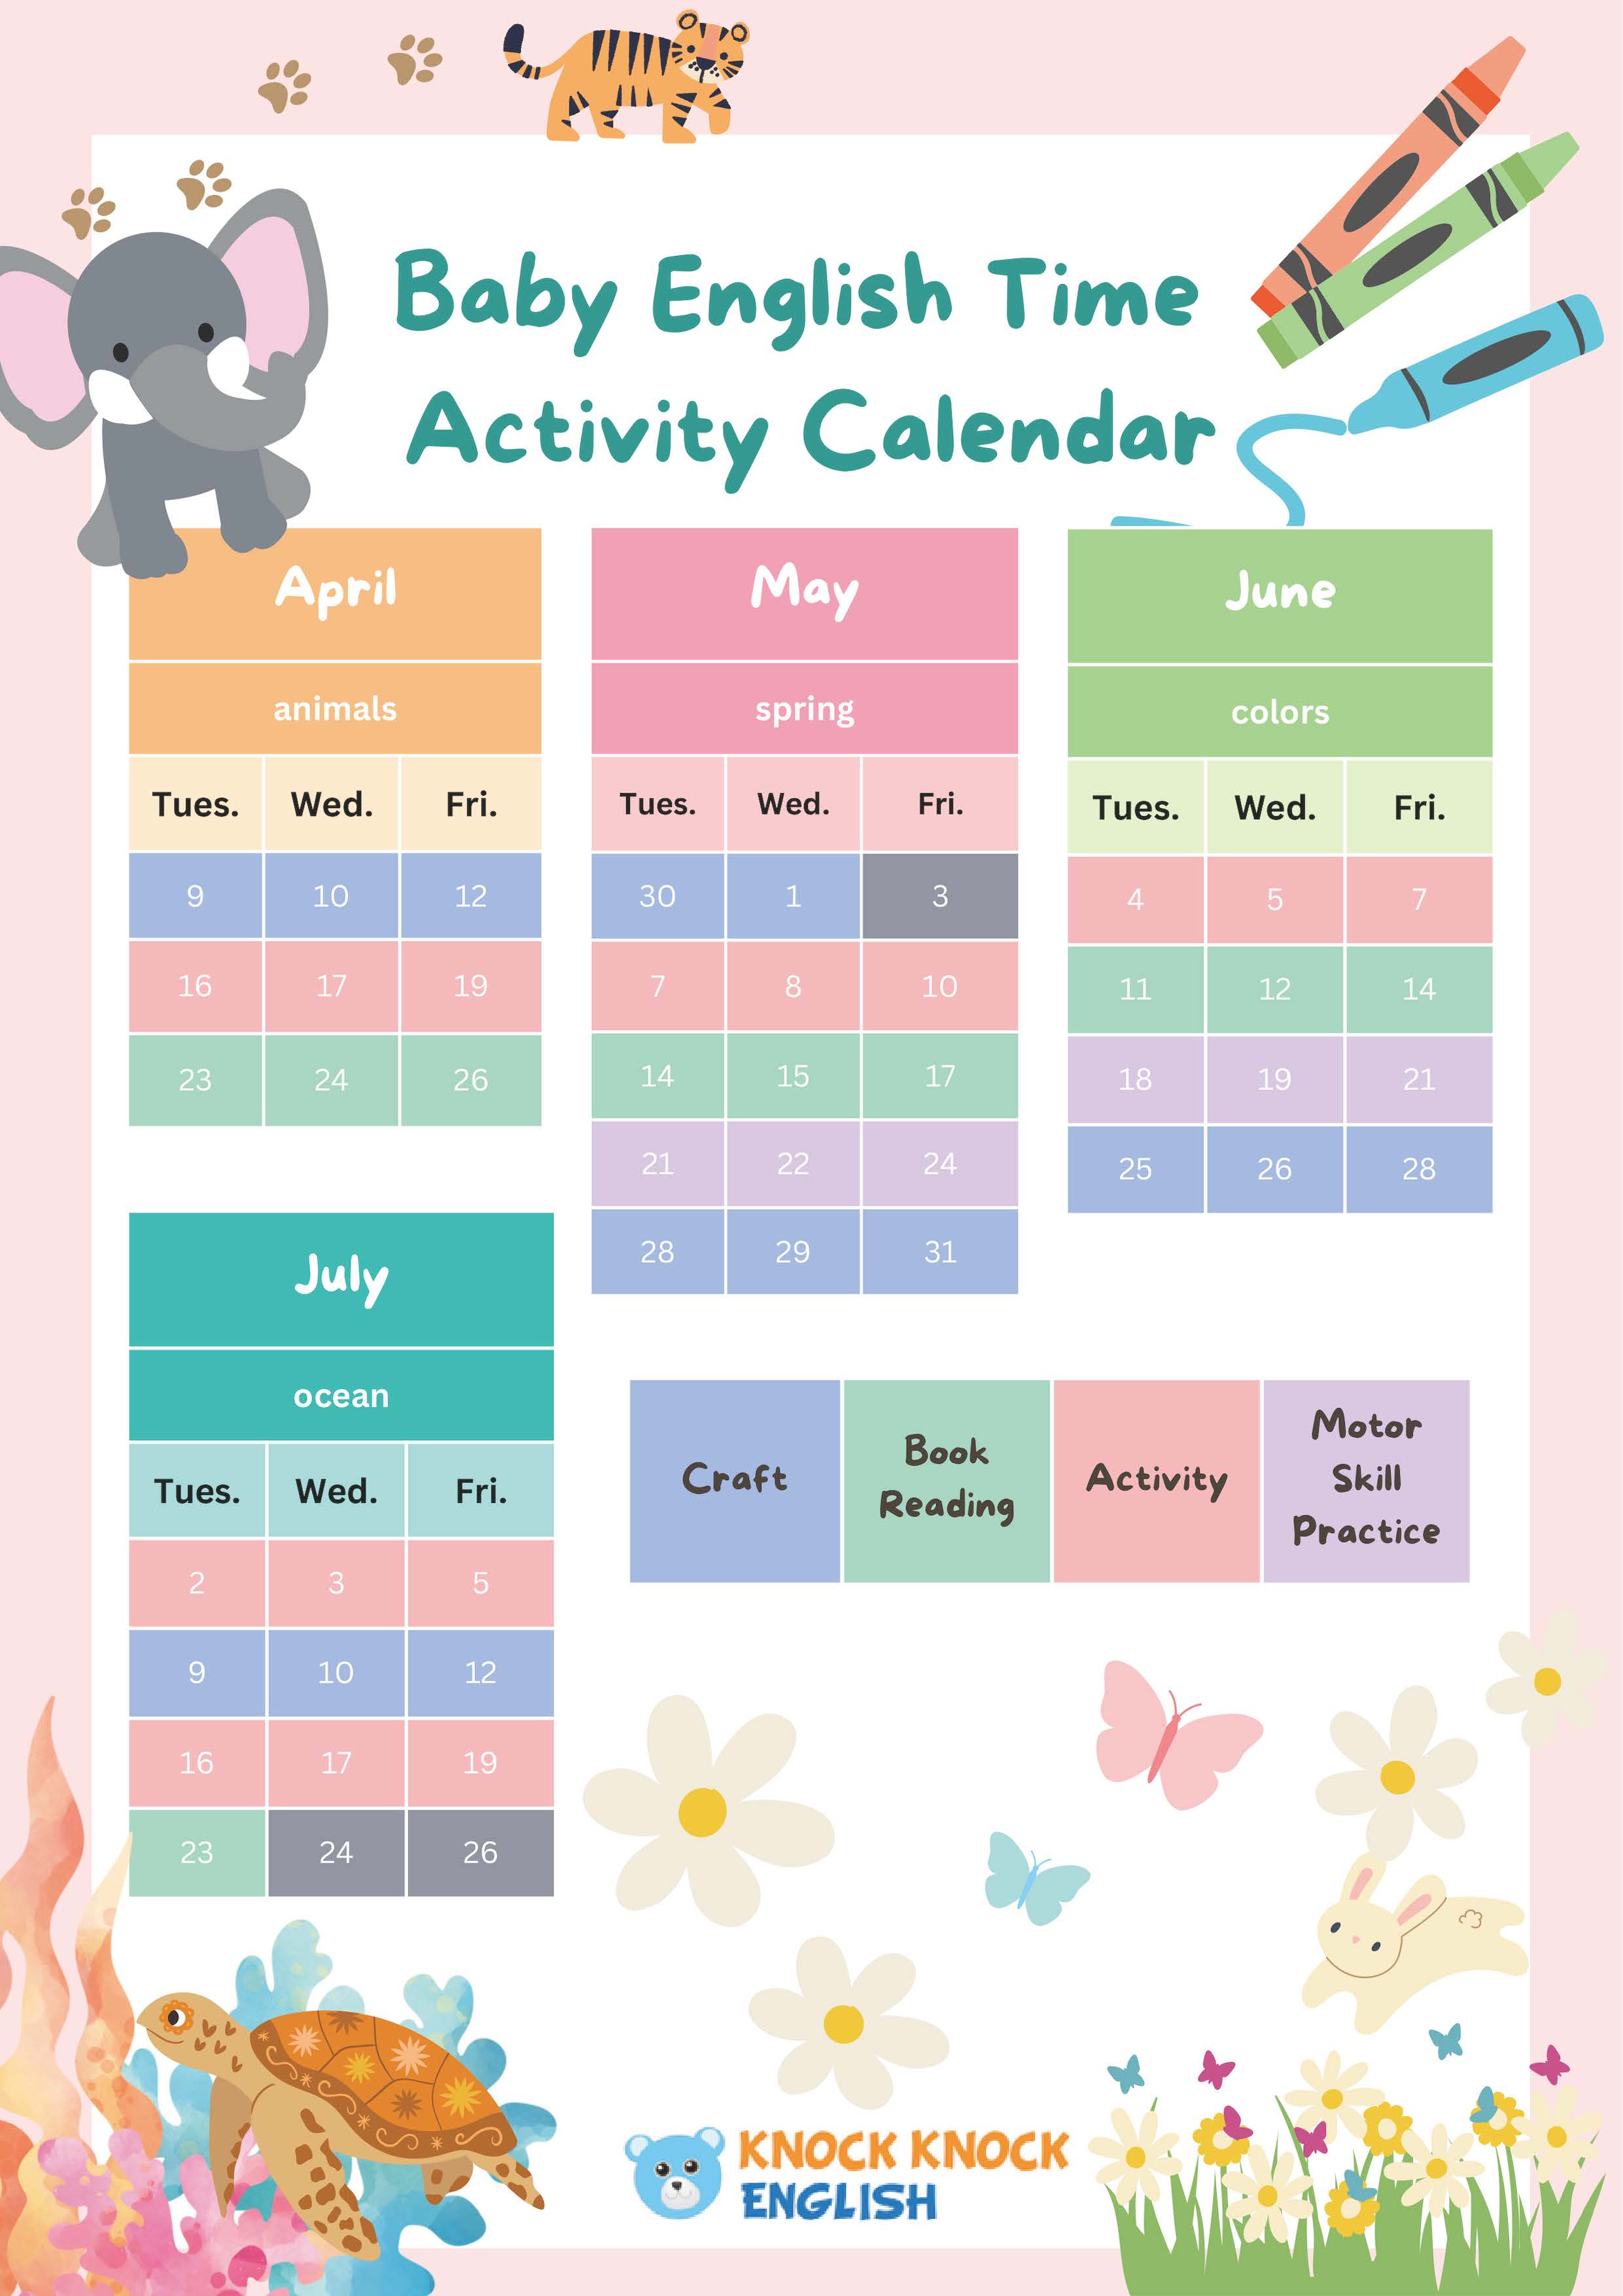 Baby English Time Monthly Topic & Activity